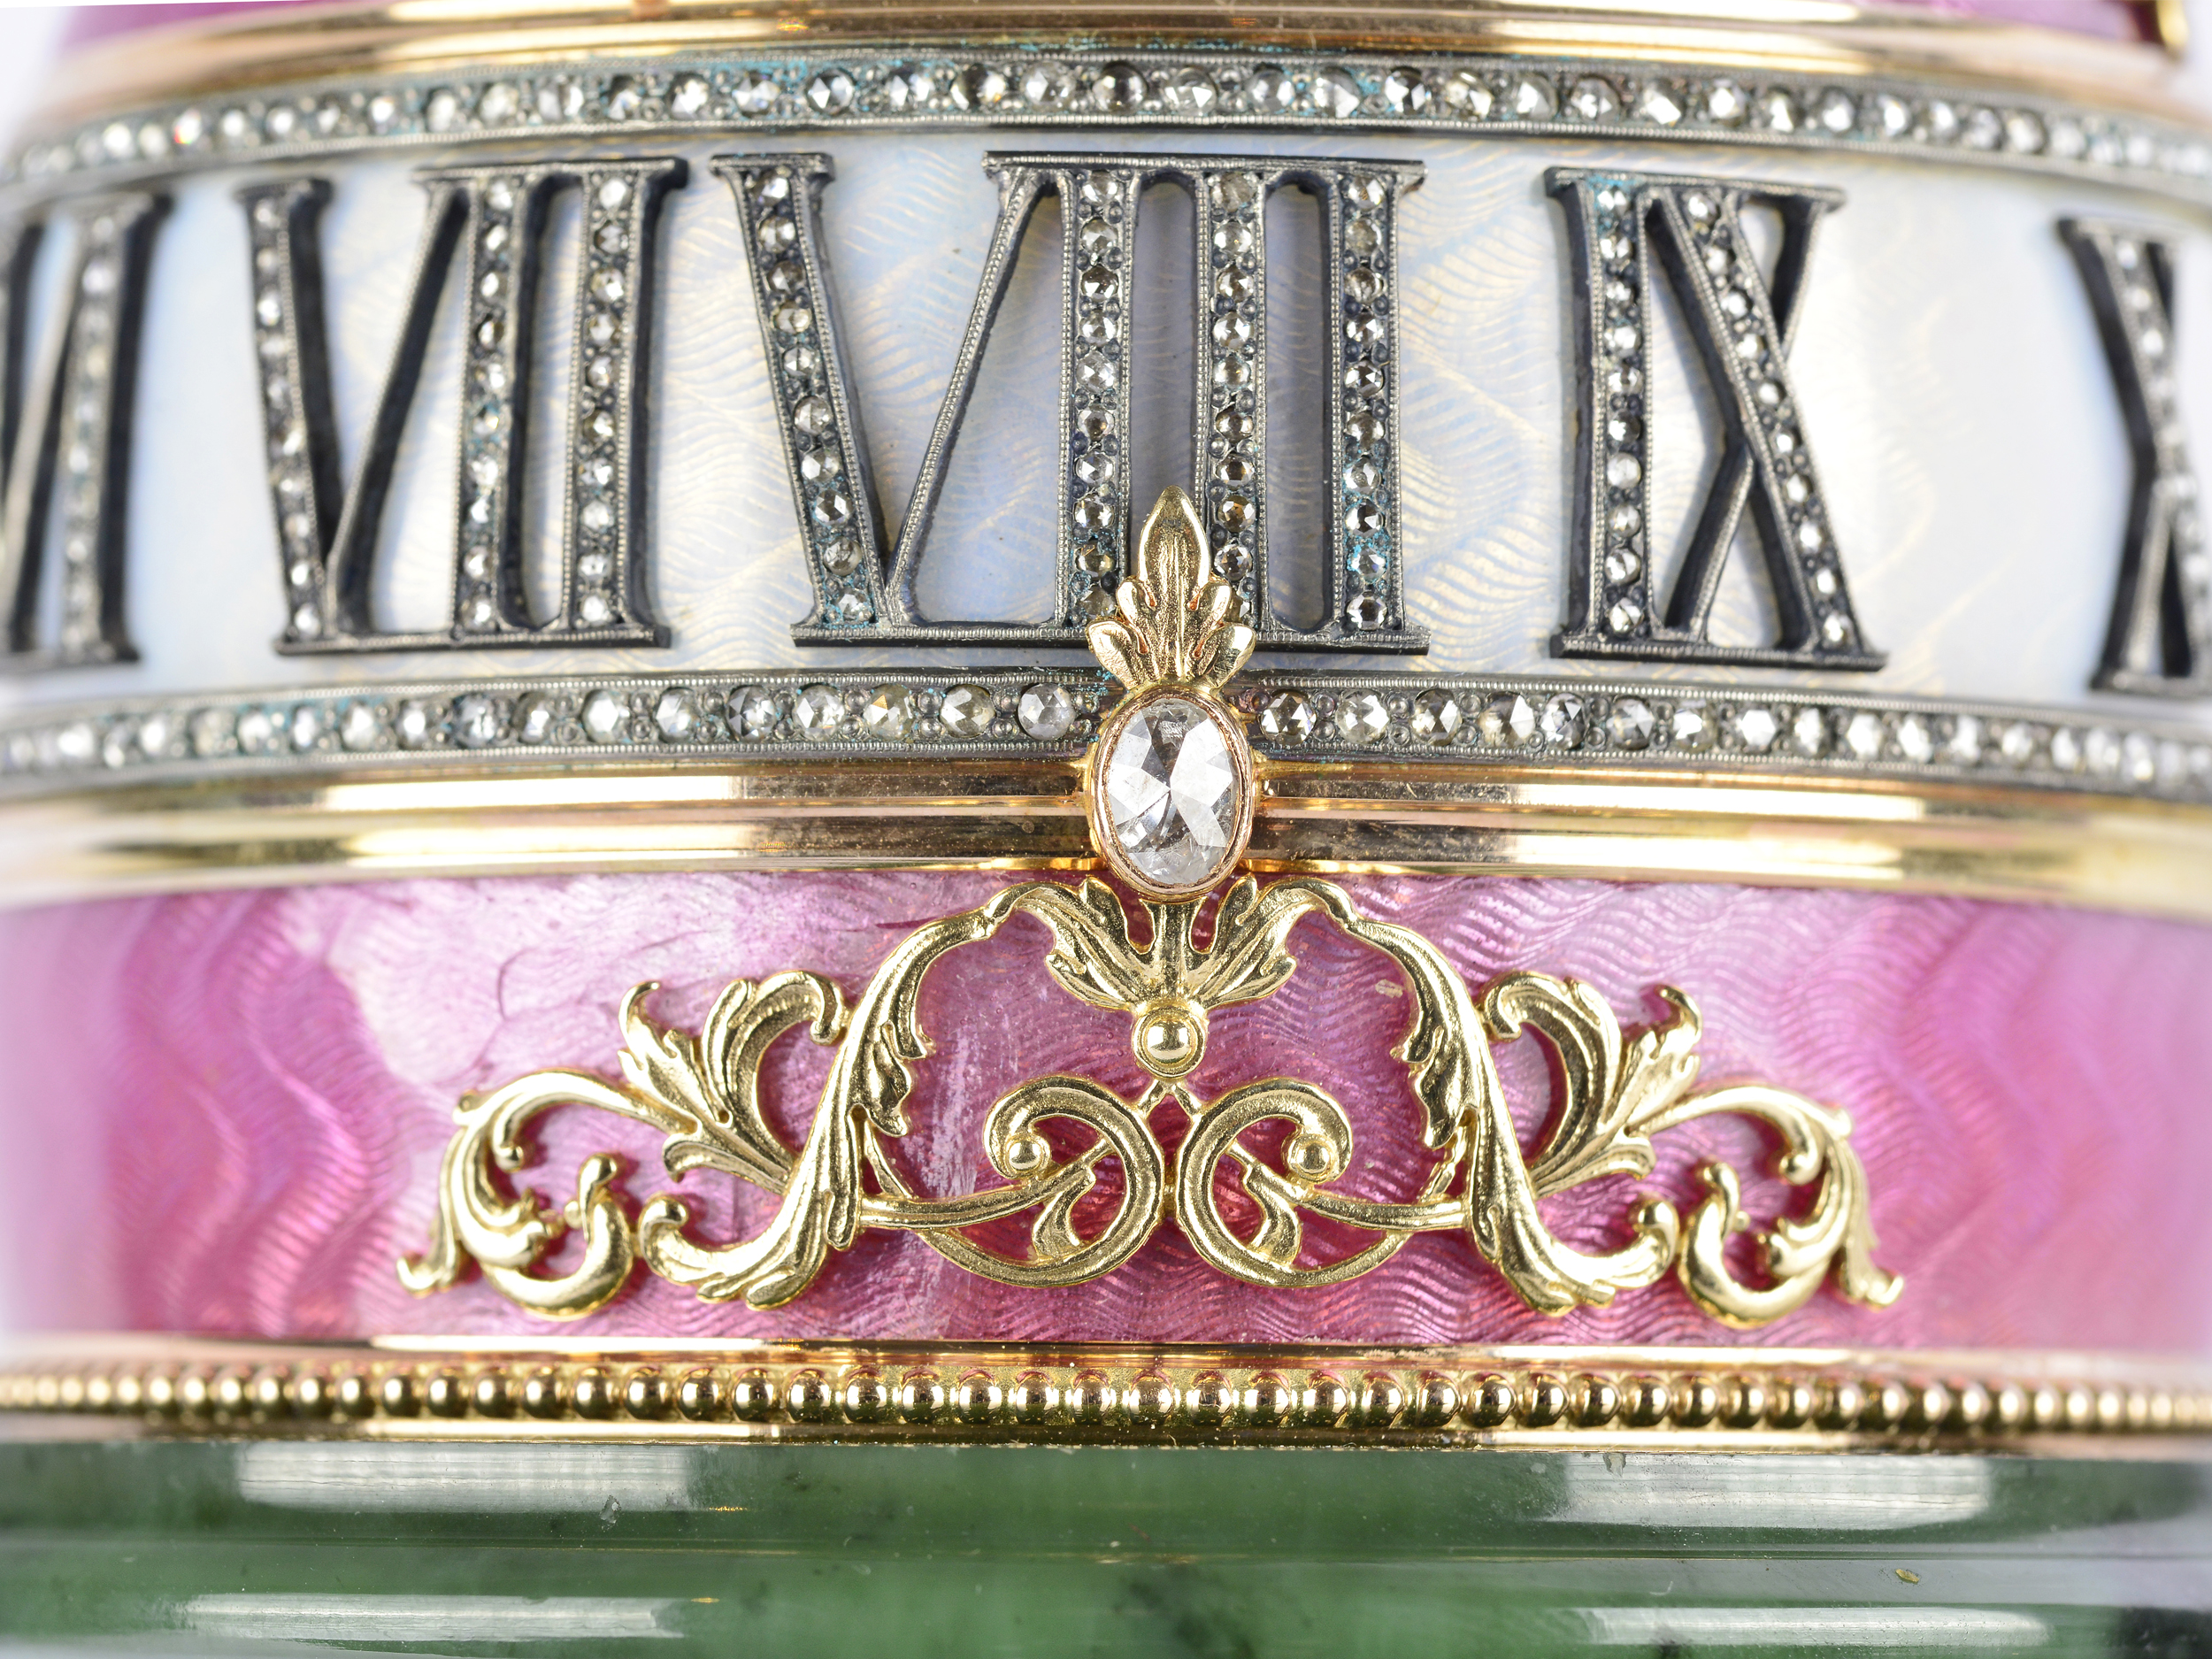 A highly significant unique colonnade clock in the style of Peter Carl Fabergé, Saint Petersburg 184 - Image 8 of 17